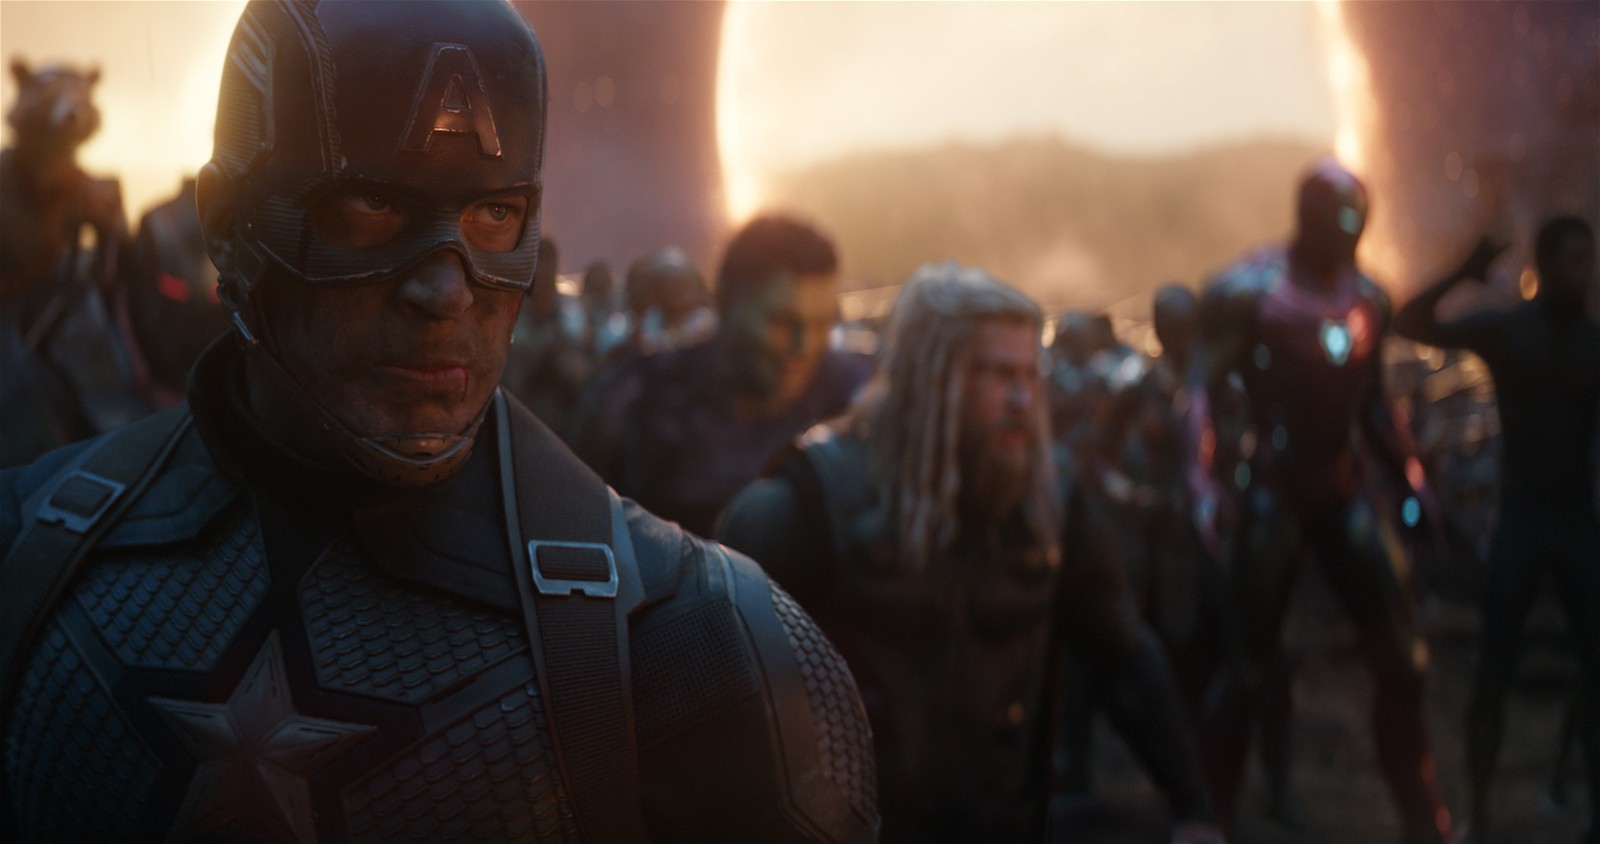 Avengers: Endgame was a catartic celebration of the MCU and a farewell to some beloved heroes